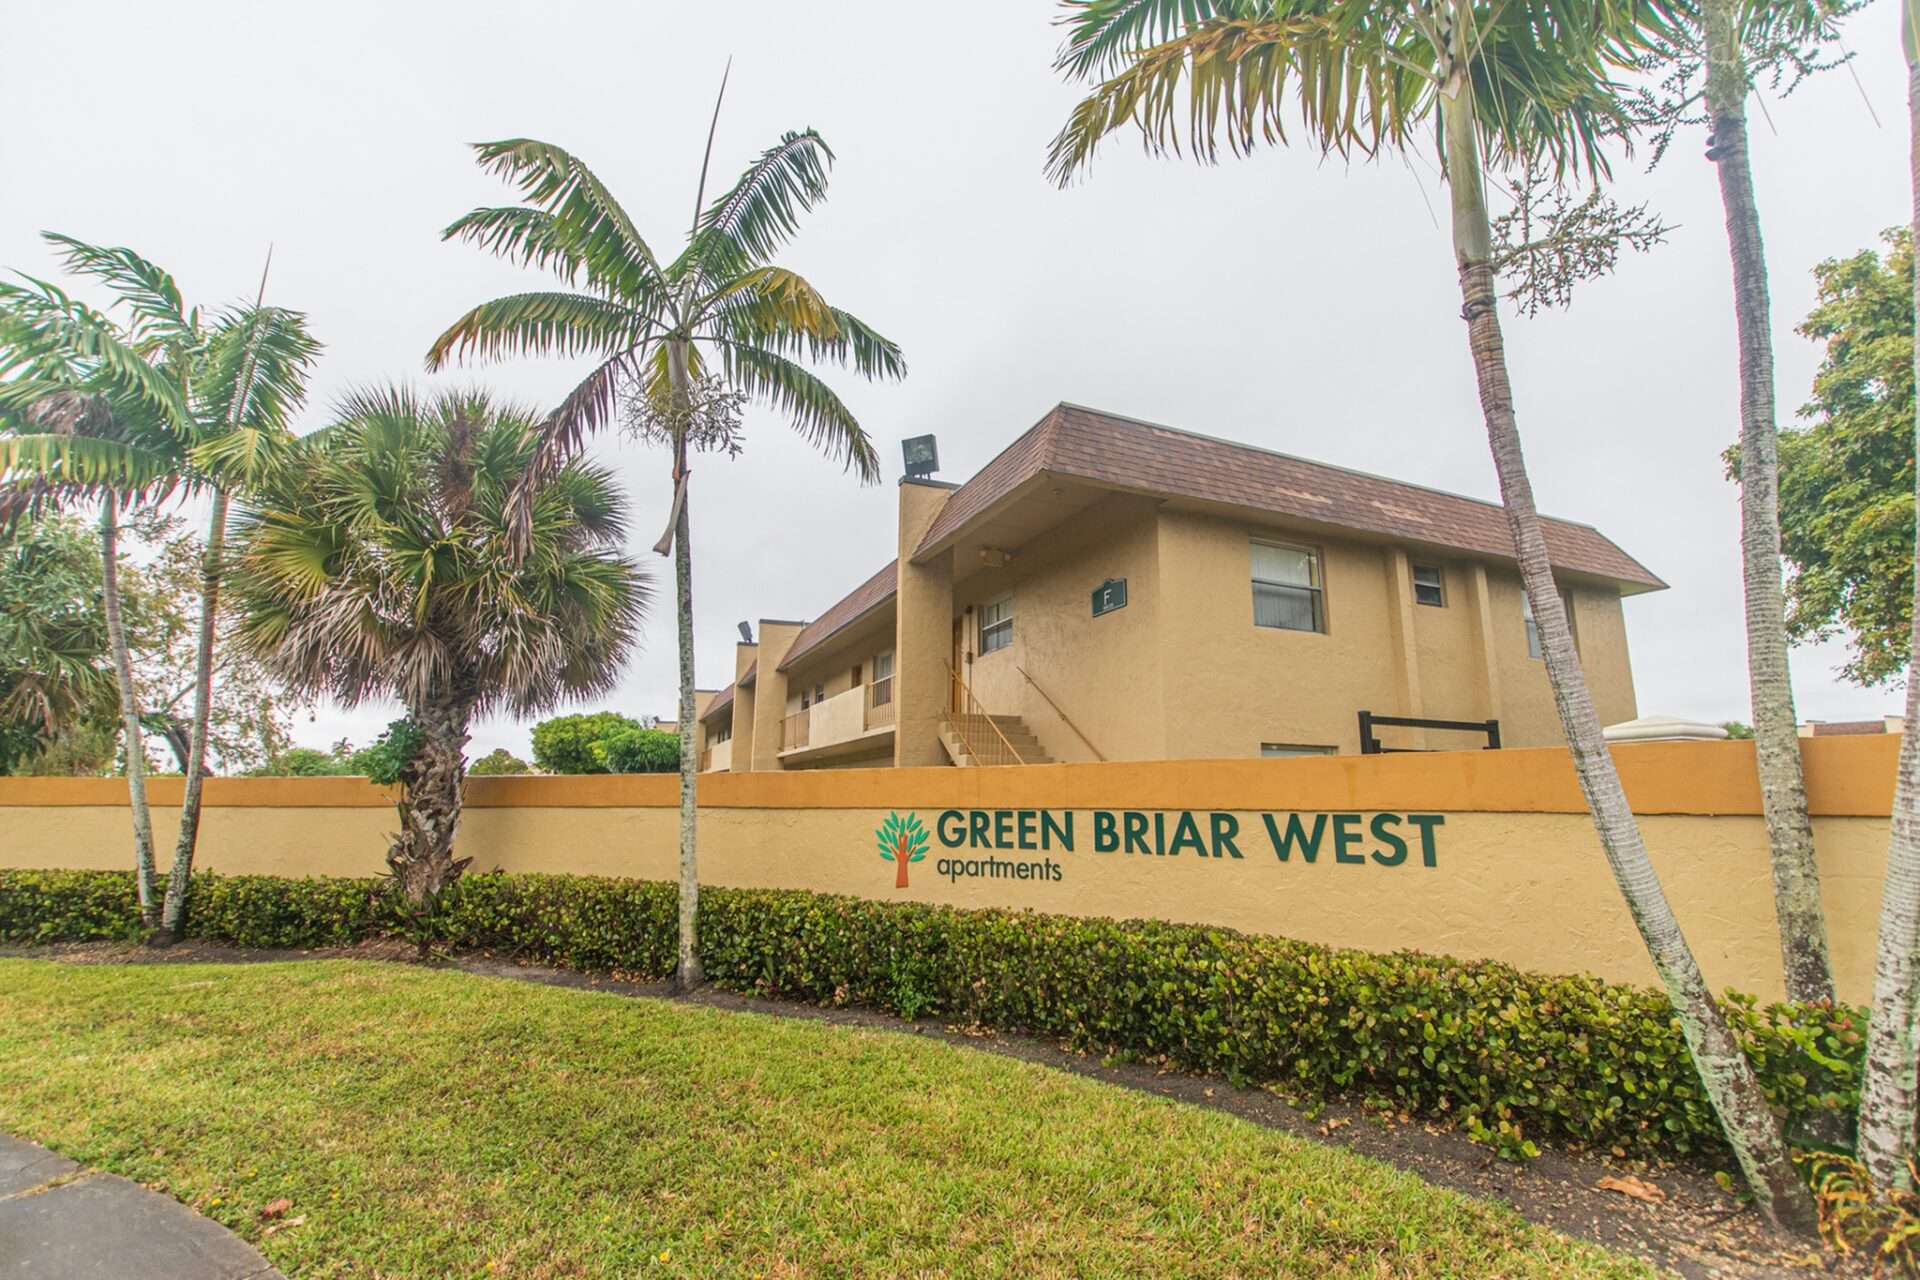 Sign saying "Green Briar West apartments" with palm trees beside it.